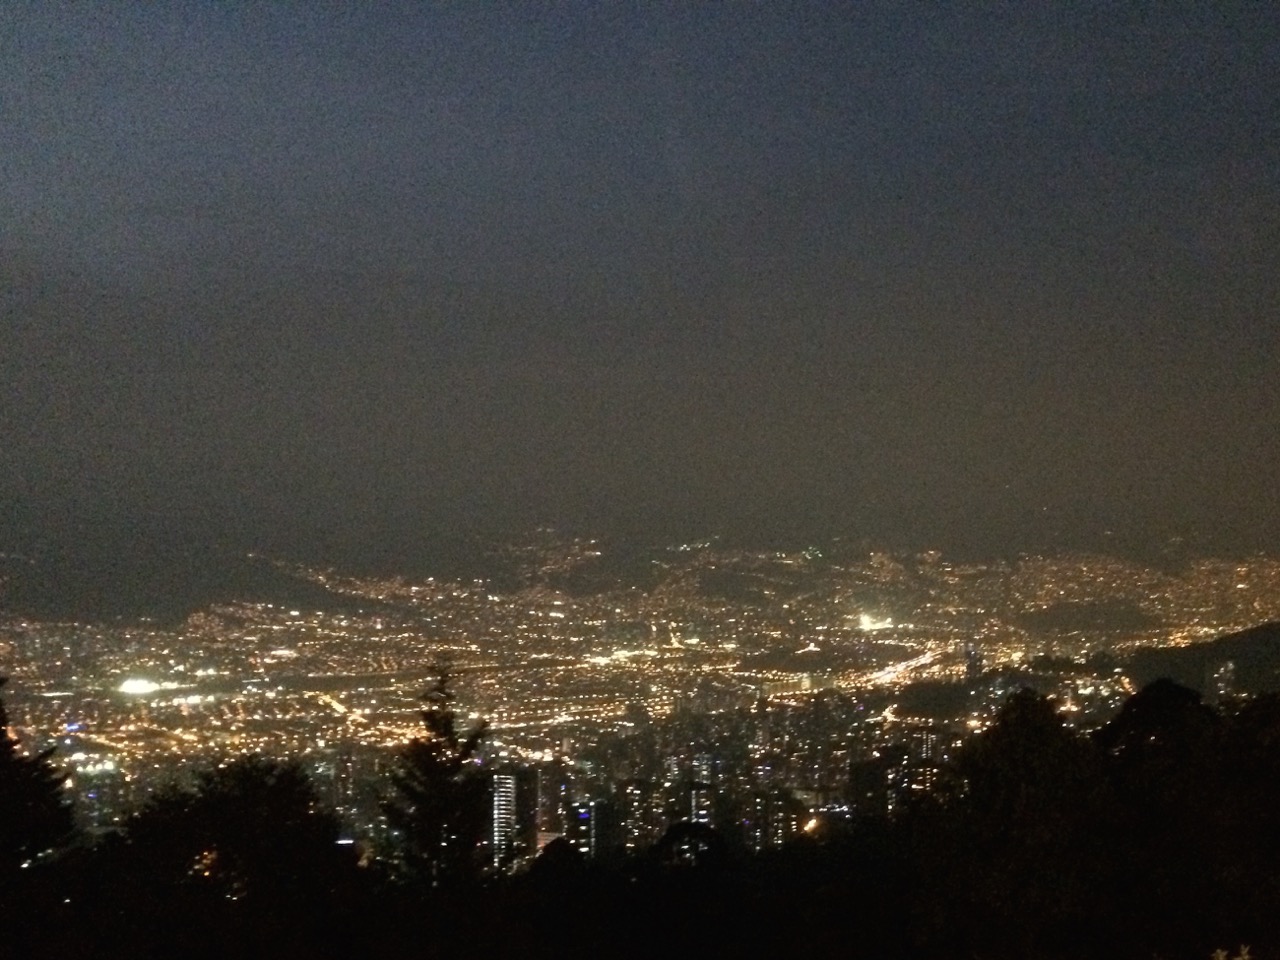 Even more of Medellin at night